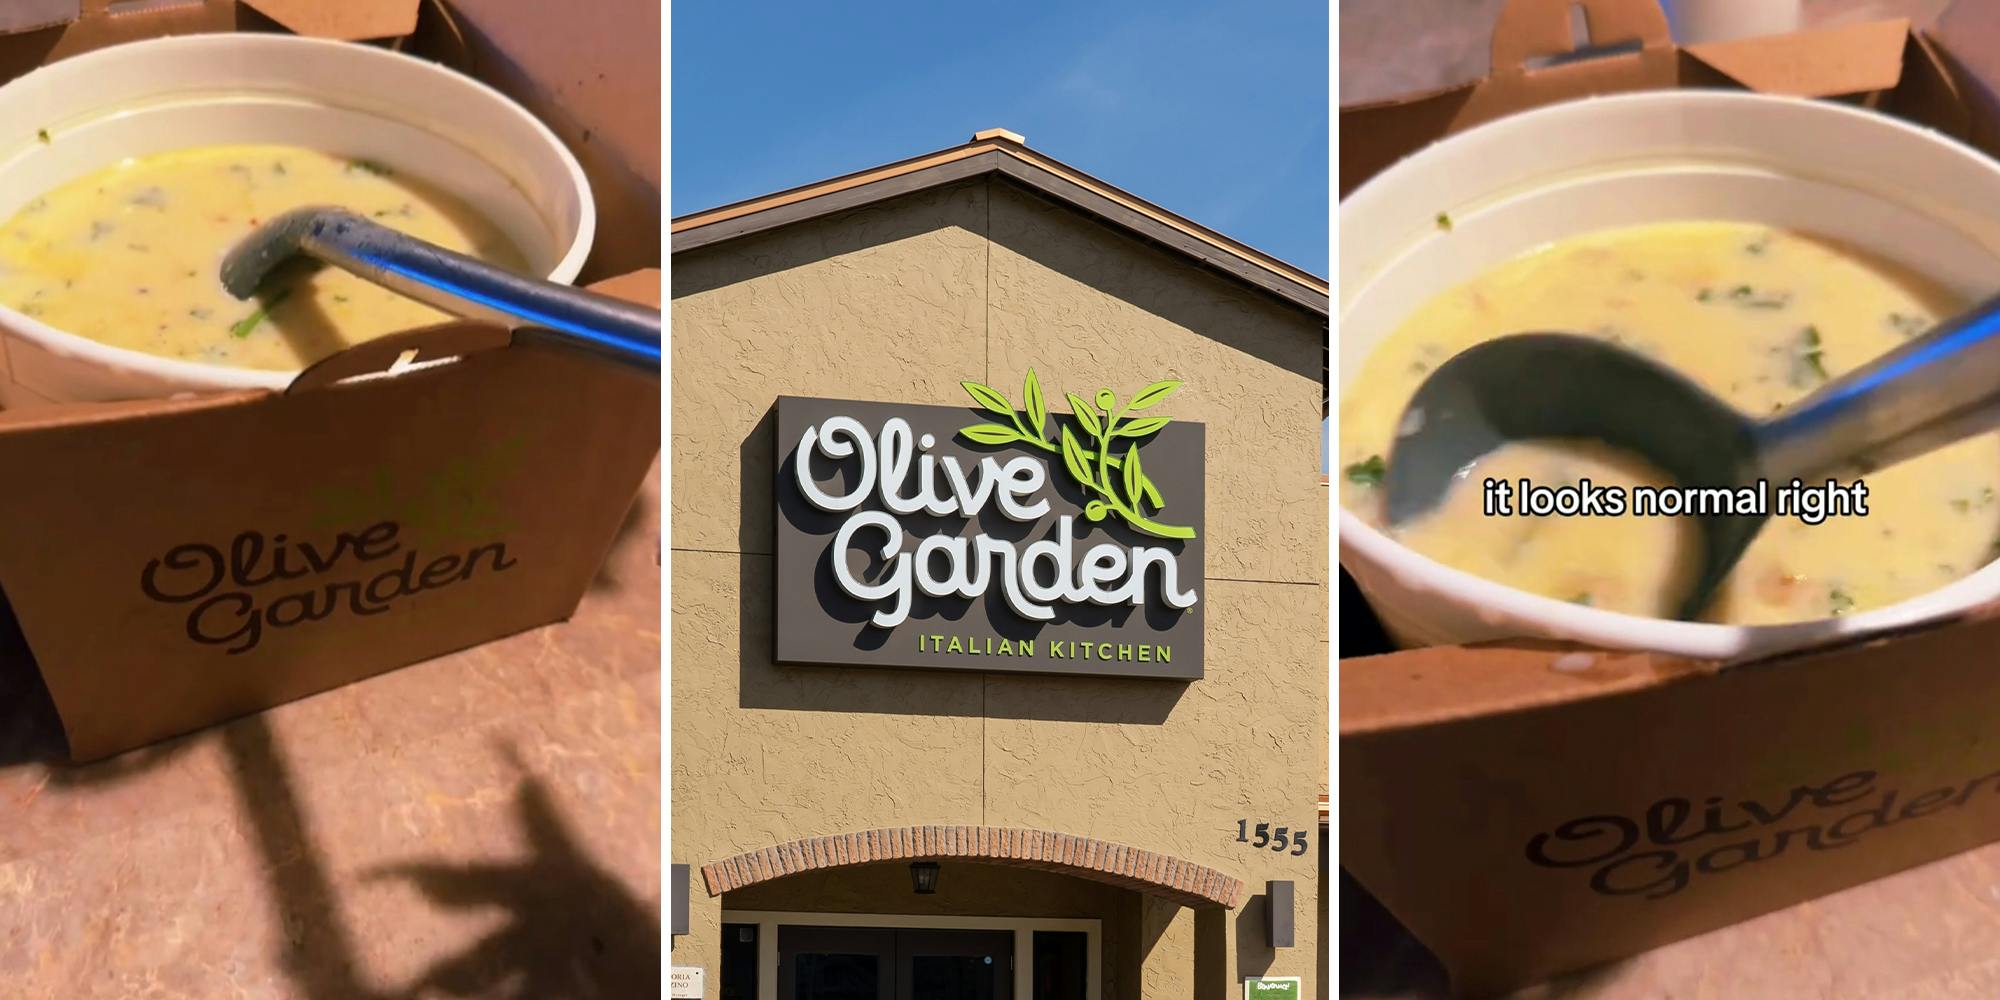 Olive Garden customer discovers whole, unpeeled potatoes in soup